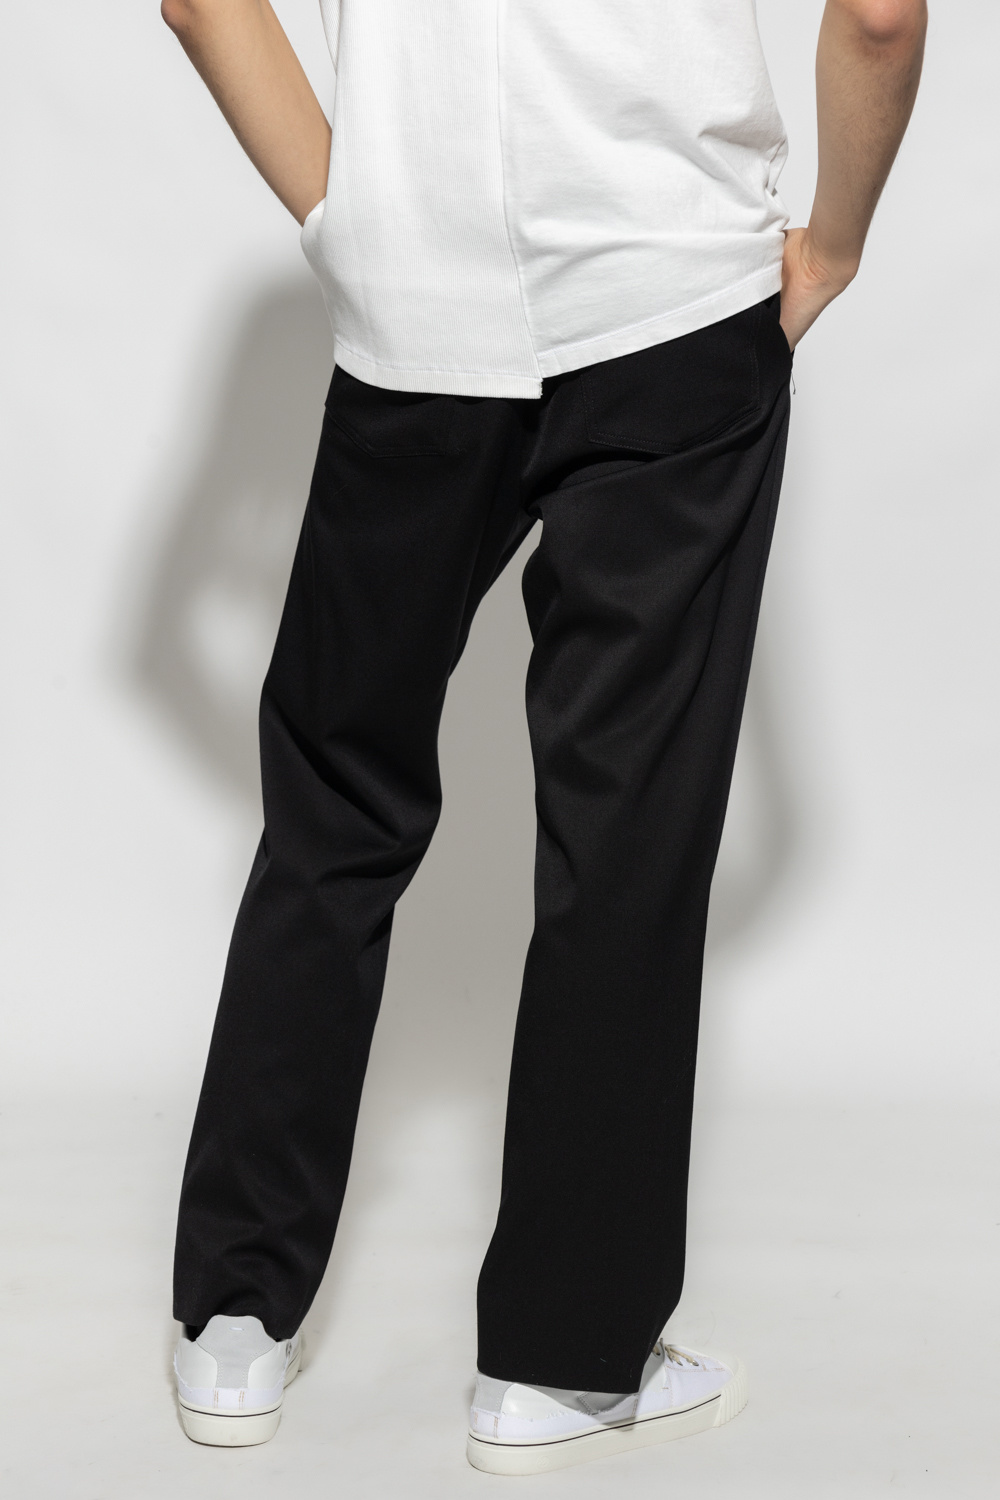 MM6 Maison Margiela ribbed trousers with straight legs